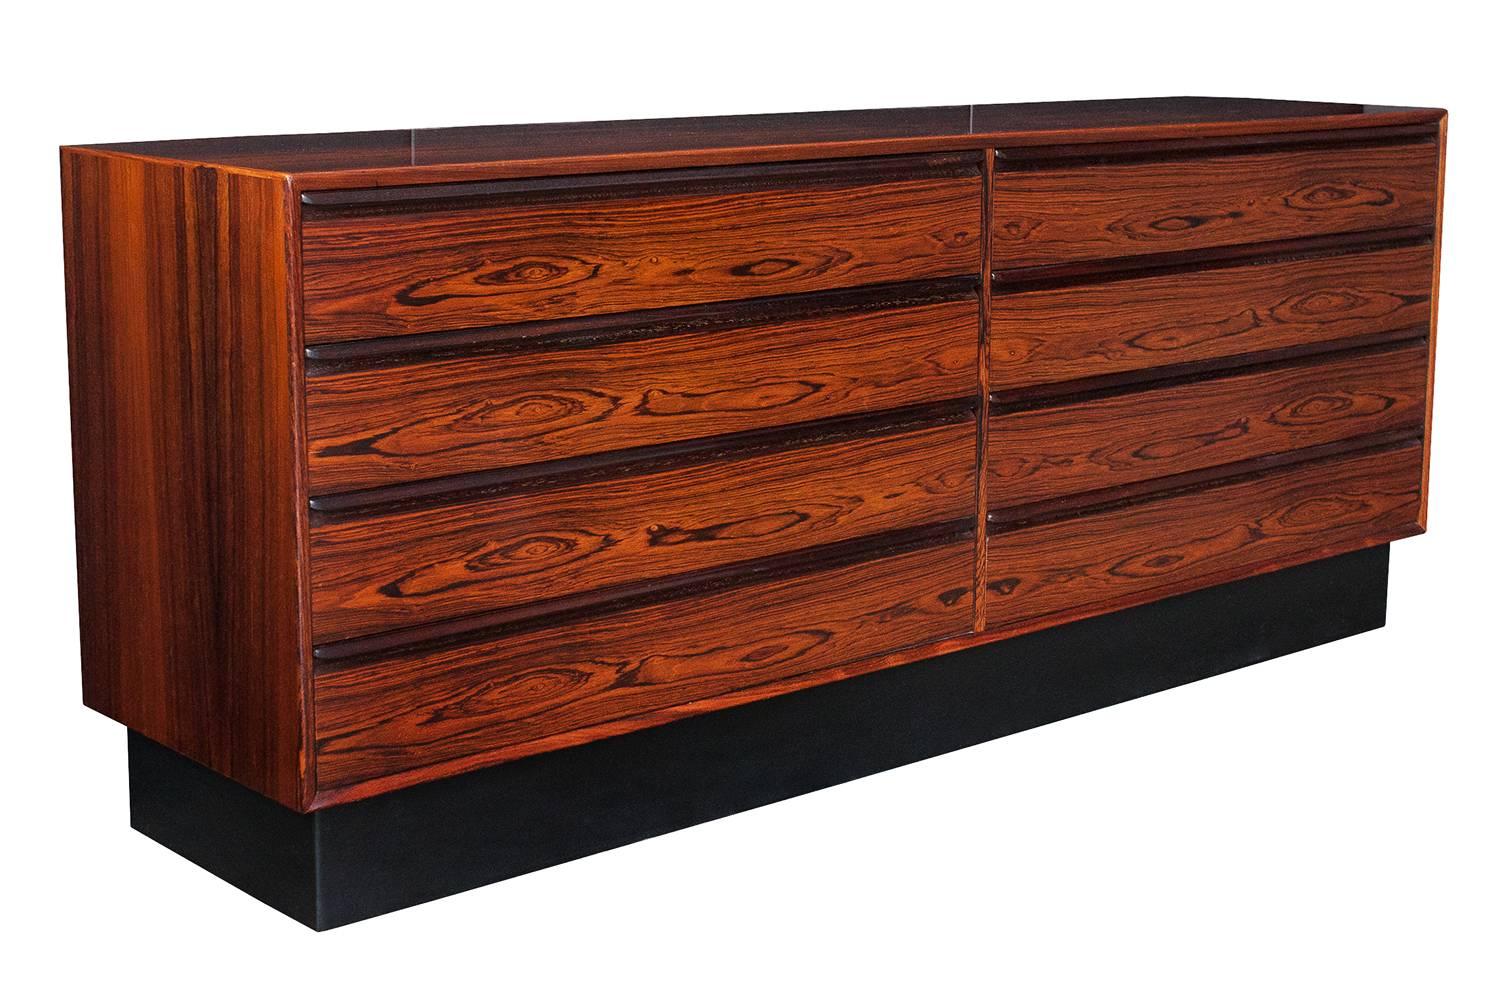 A Brazilian rosewood eight-drawer chest by Westnofa of Norway. Figured rosewood veneer with solid rosewood molded handles. Mahogany lined drawers. Original black Naugahyde faux leather plinth base. Retains Westnofa label on the back of the